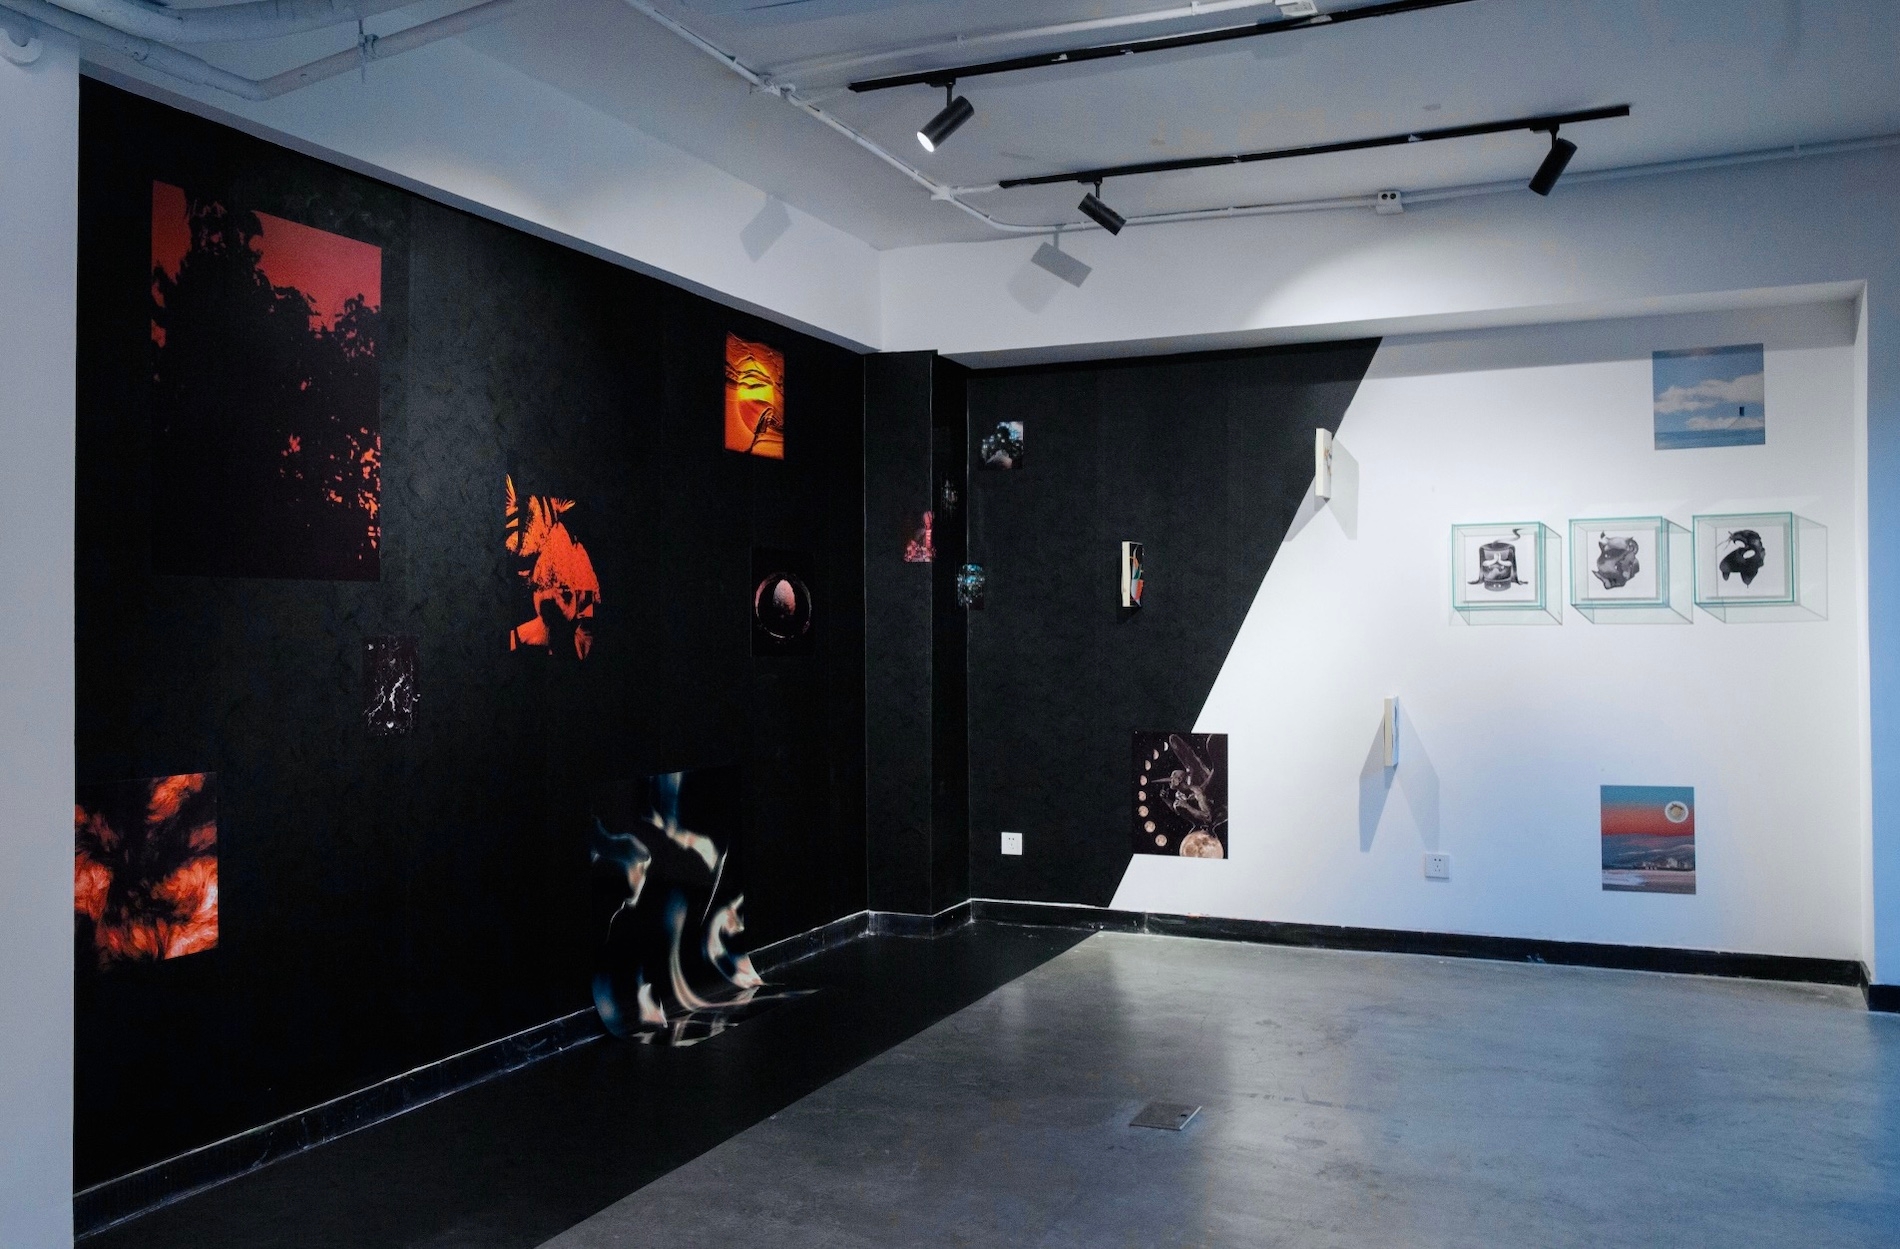 A photo of an indoor space with prints of computer generated imagery on the walls